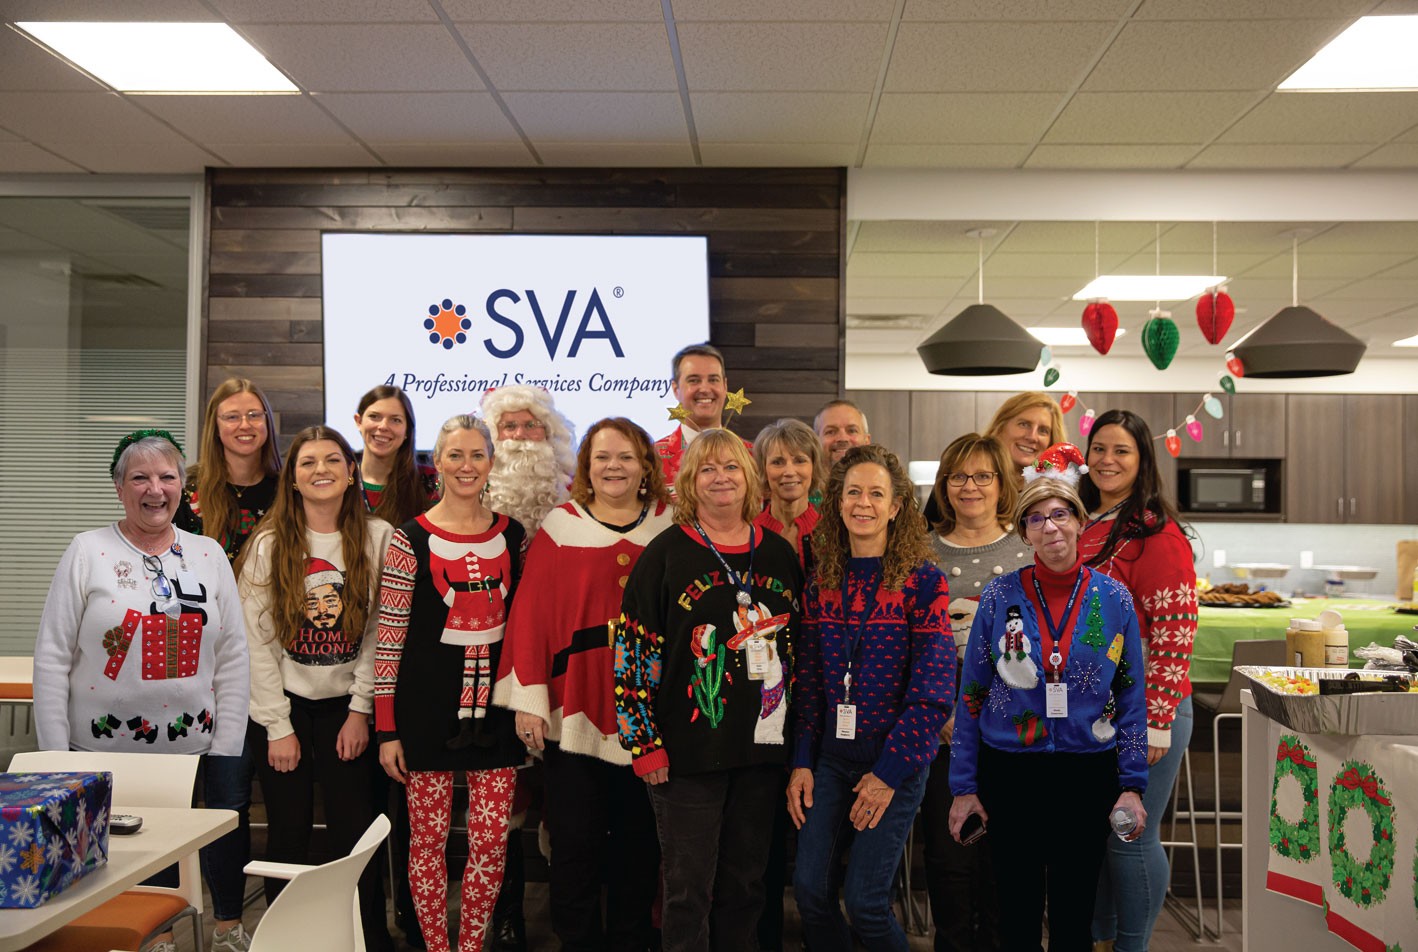 SVA employees celebrating the holiday season by dressing in their 